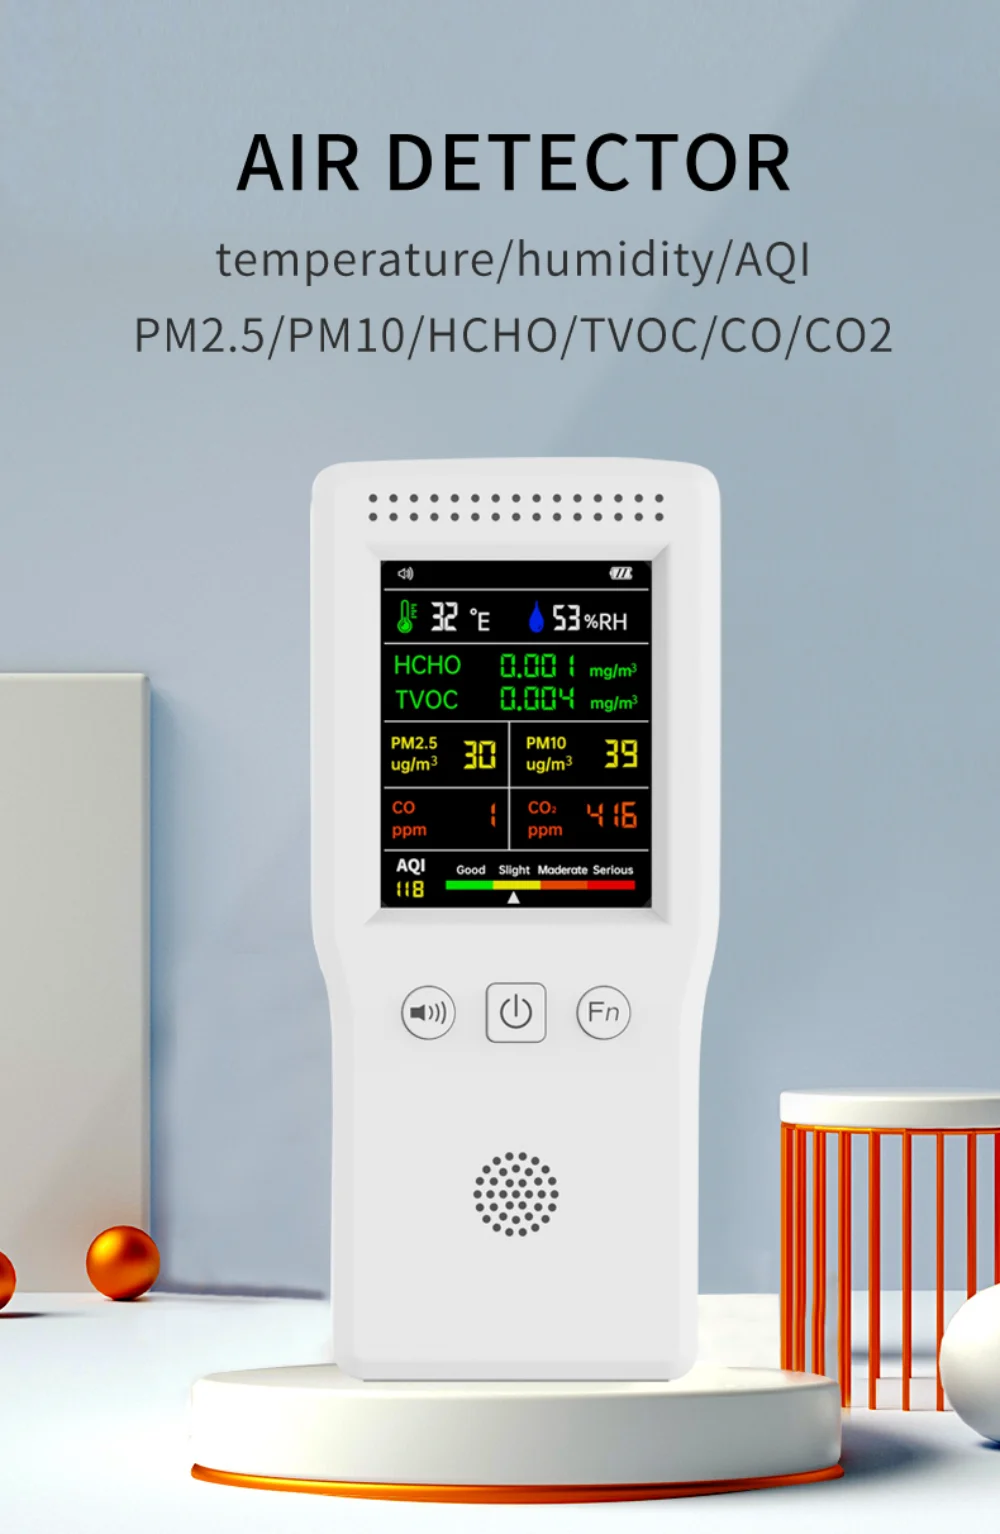 The indoor air quality detector, also known as the TVOC and carbon dioxide detector, is sitting on top of a table.